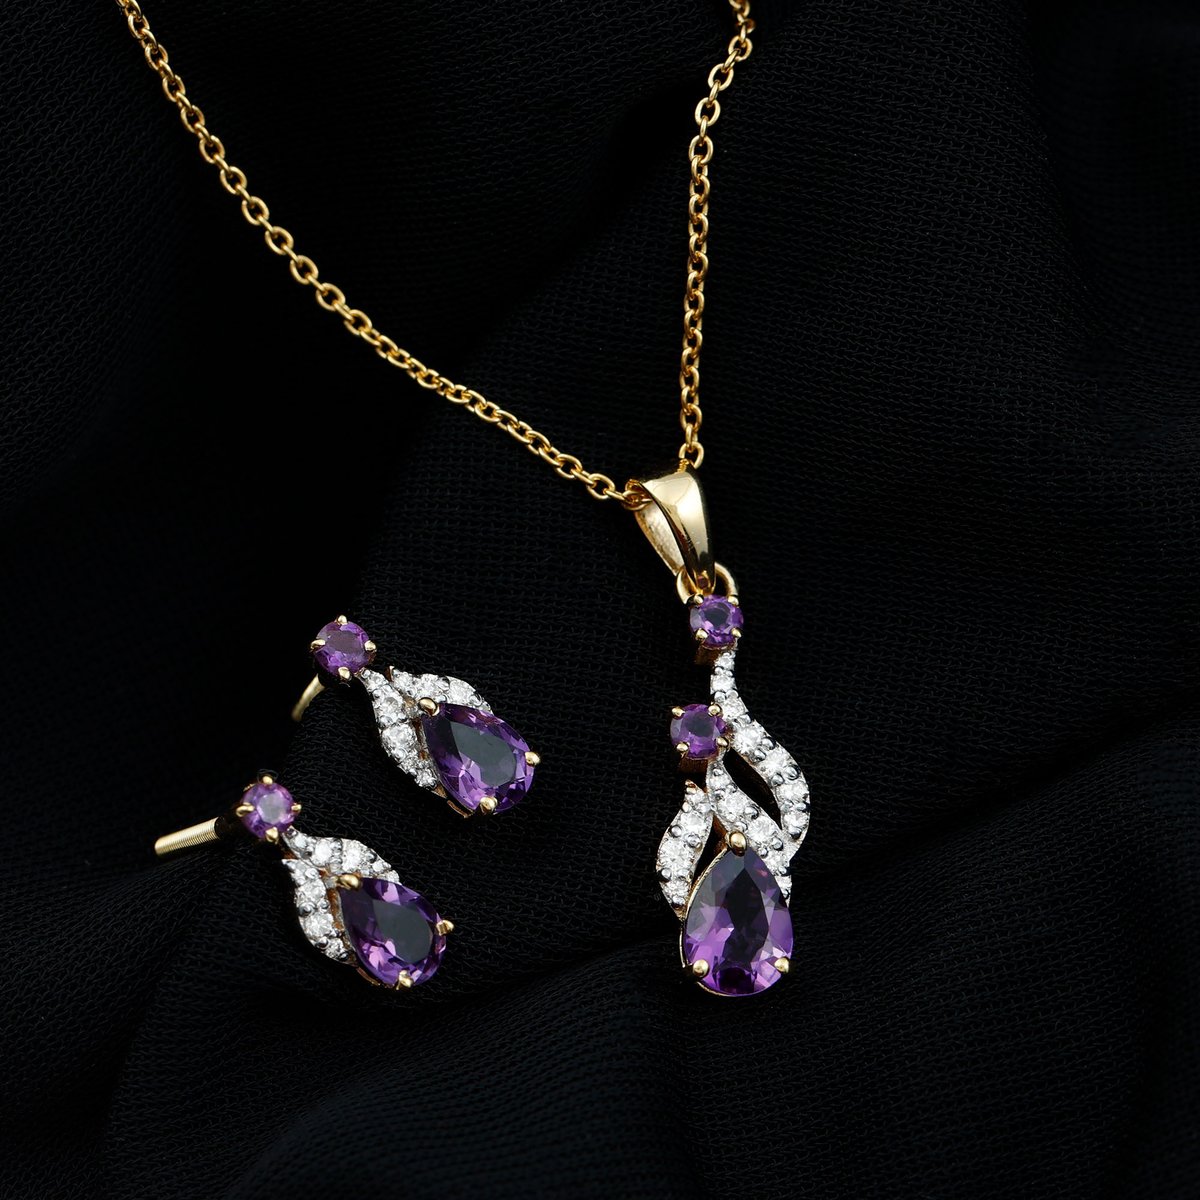 Valentines or not, when love comes in a set, it's always a big yes 💜

rosecjewels.com/products/real-… 

#jewelryset #amethystjewelry #amethystnecklace #amethystearrings #amethyst #pendant #necklace #earrings #pendantnecklace #jewelrydesigner